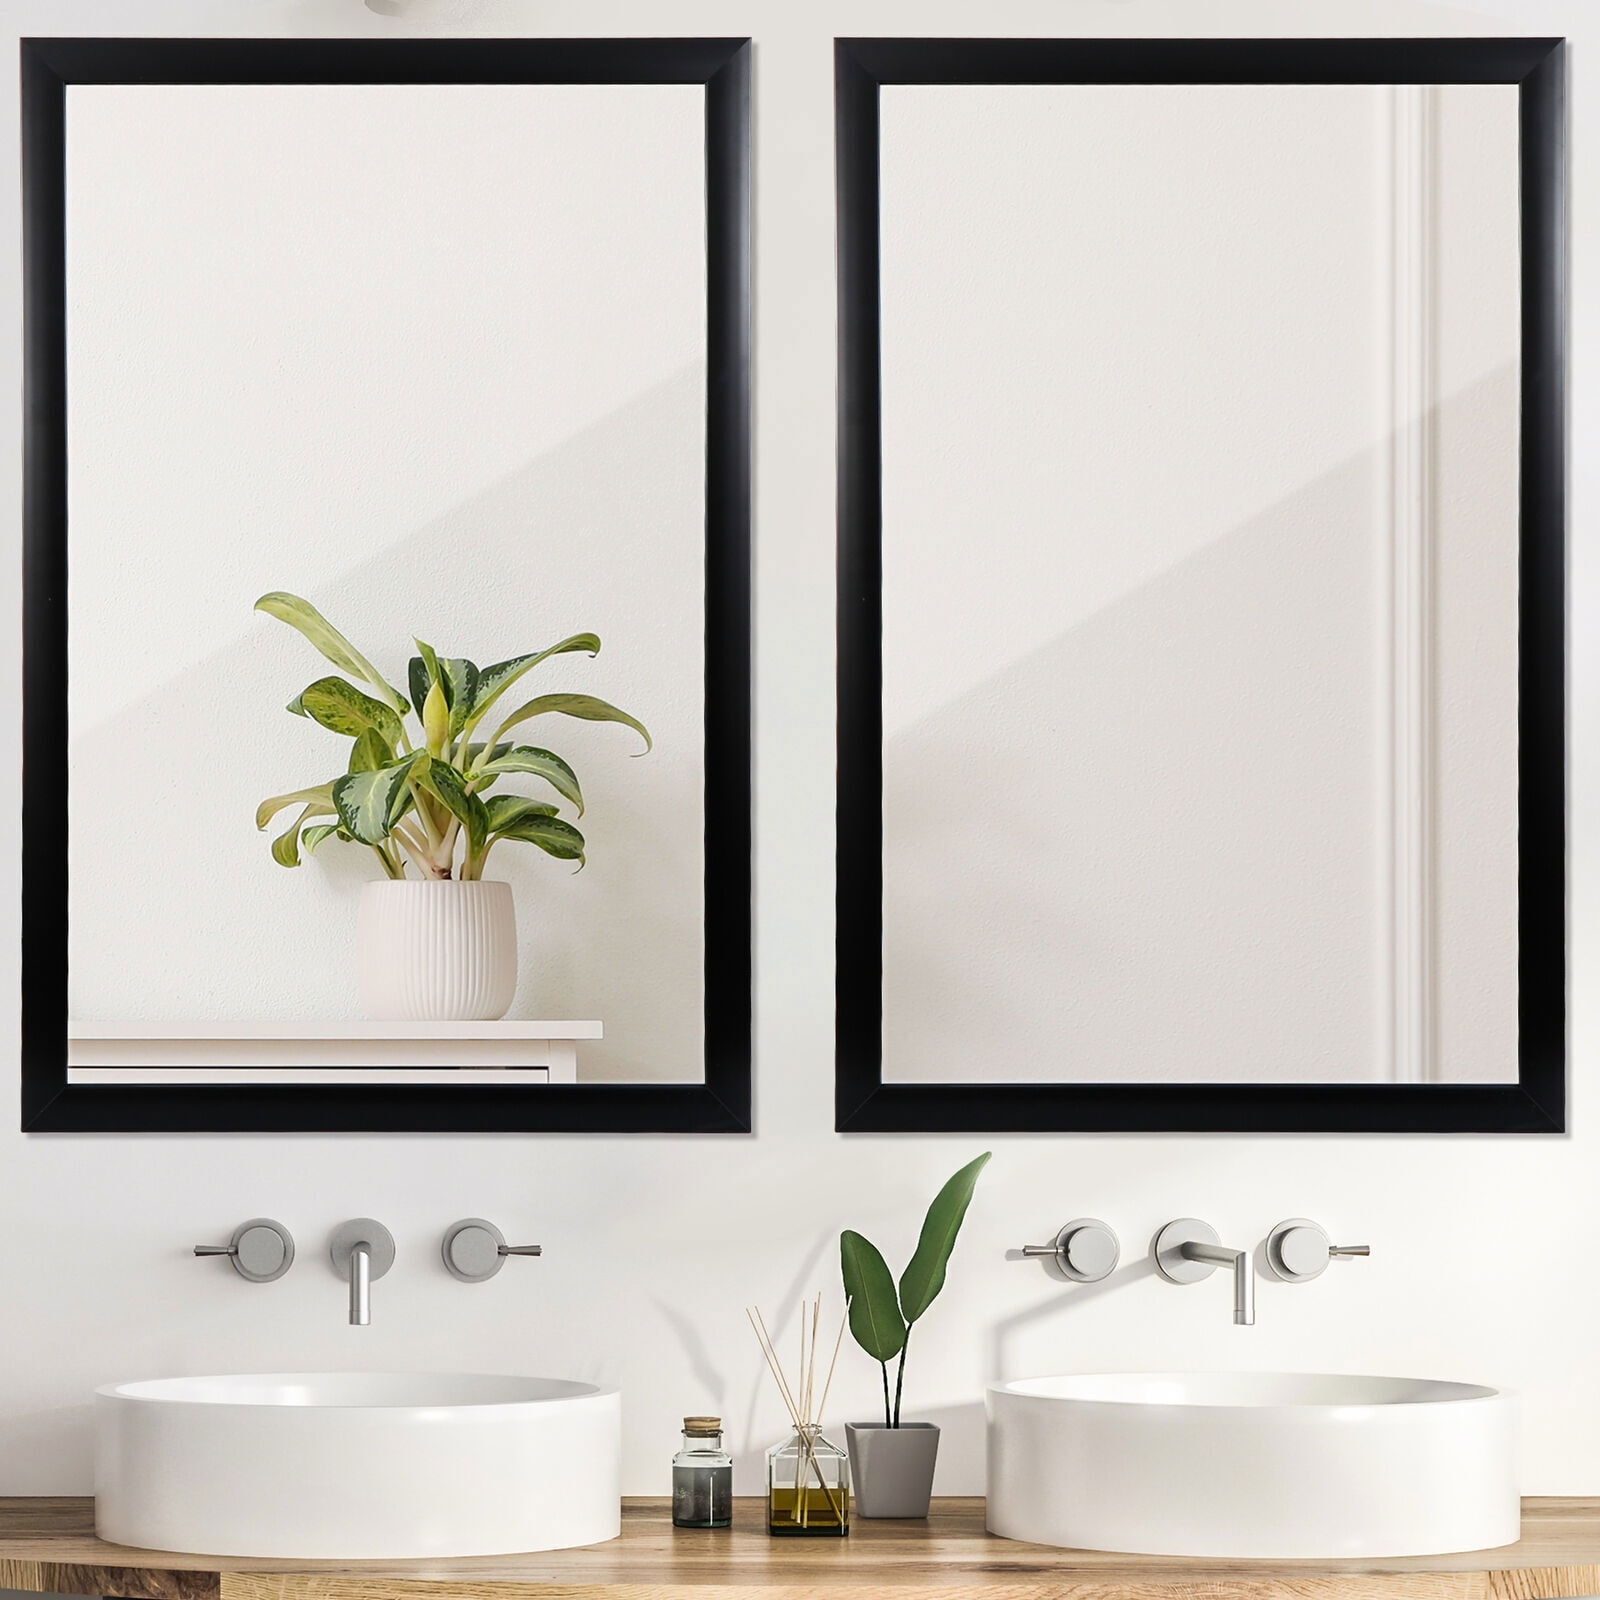 https://ak1.ostkcdn.com/images/products/is/images/direct/cbb15000f2b65ff54dd1ae9e6b8a3af892b1cd74/2Pcs-24%22x36%22-Rectangular-Wall-Mounted-Vanity-Mirrors.jpg